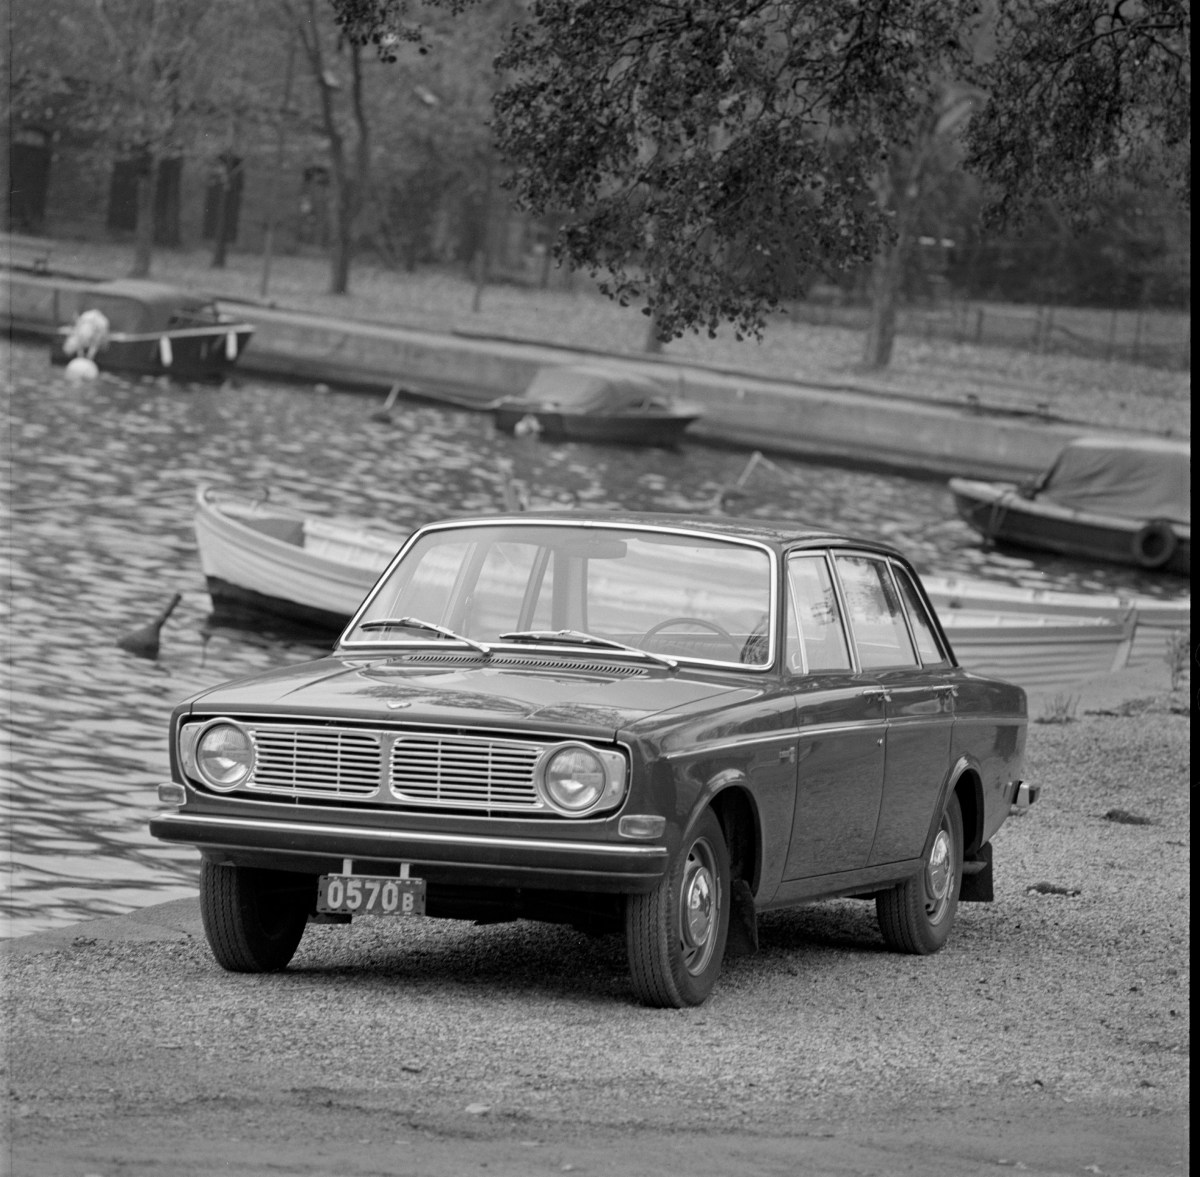 A 3/4 front view of a 1967 Volvo 140 Series sedan. Photo is in black and white and shows boats and water in the background